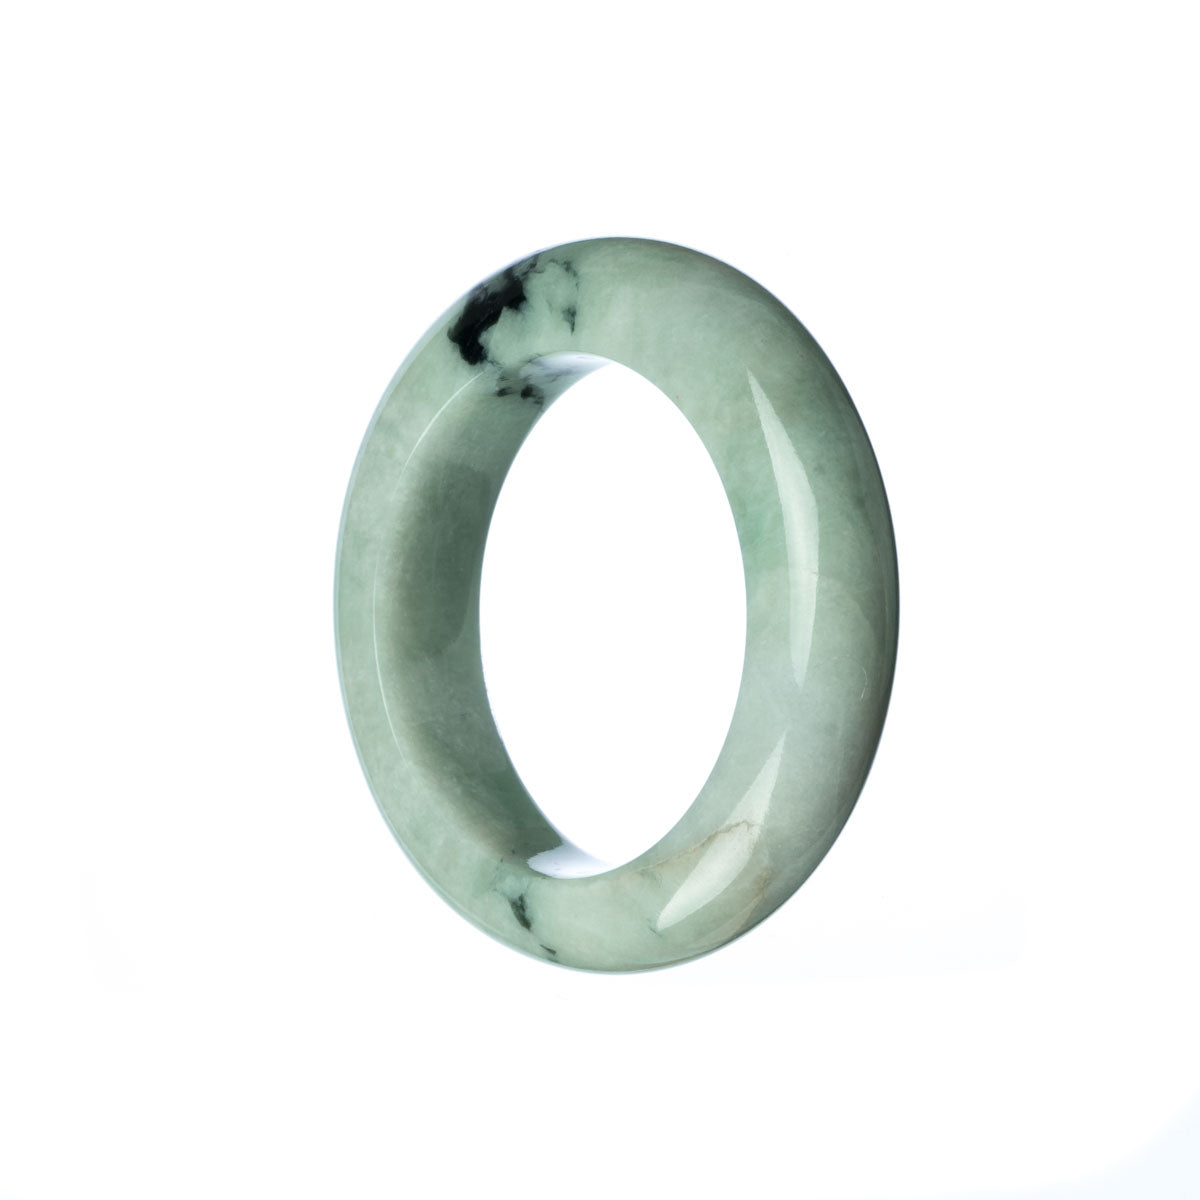 A close-up image of a green jade bracelet, featuring a semi-round shape and designed for children. The bracelet is made from authentic grade A jade and is sold by MAYS GEMS.